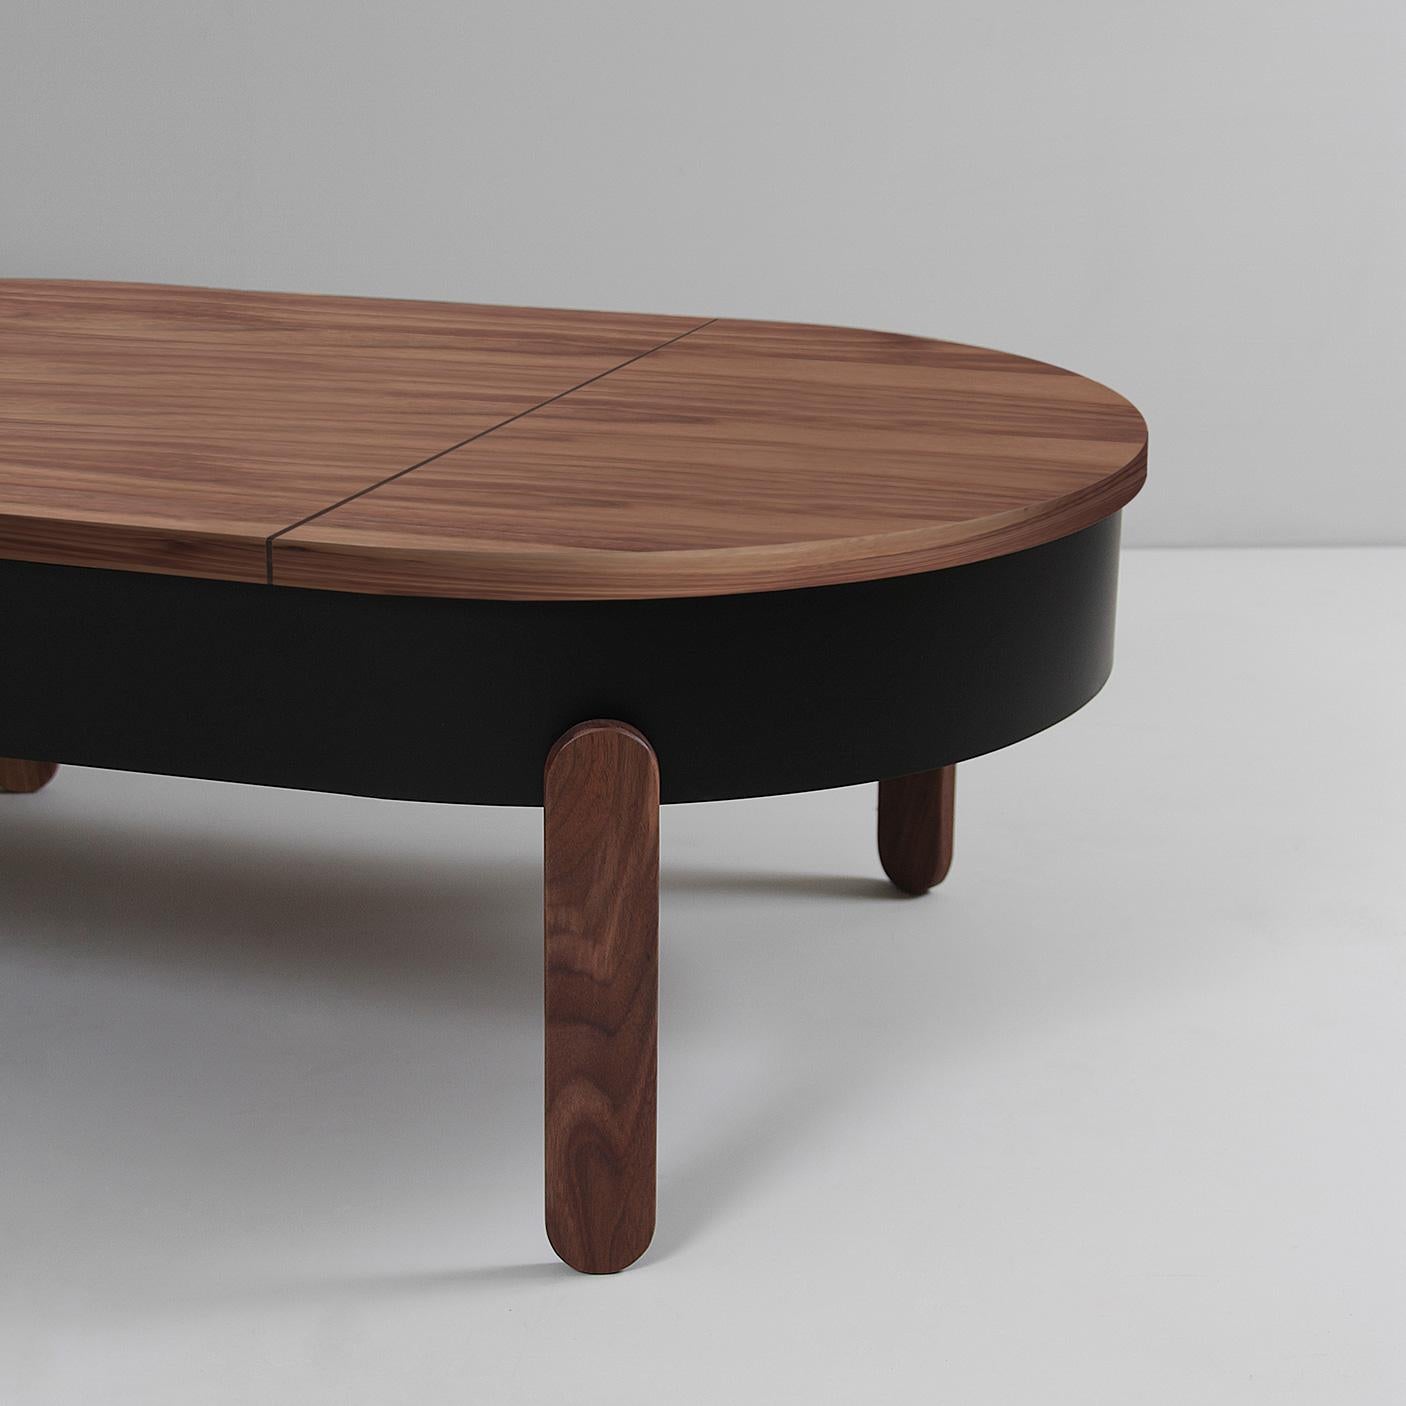 Batea L Coffee Table, Walnut & Black In New Condition For Sale In Madrid, Madrid